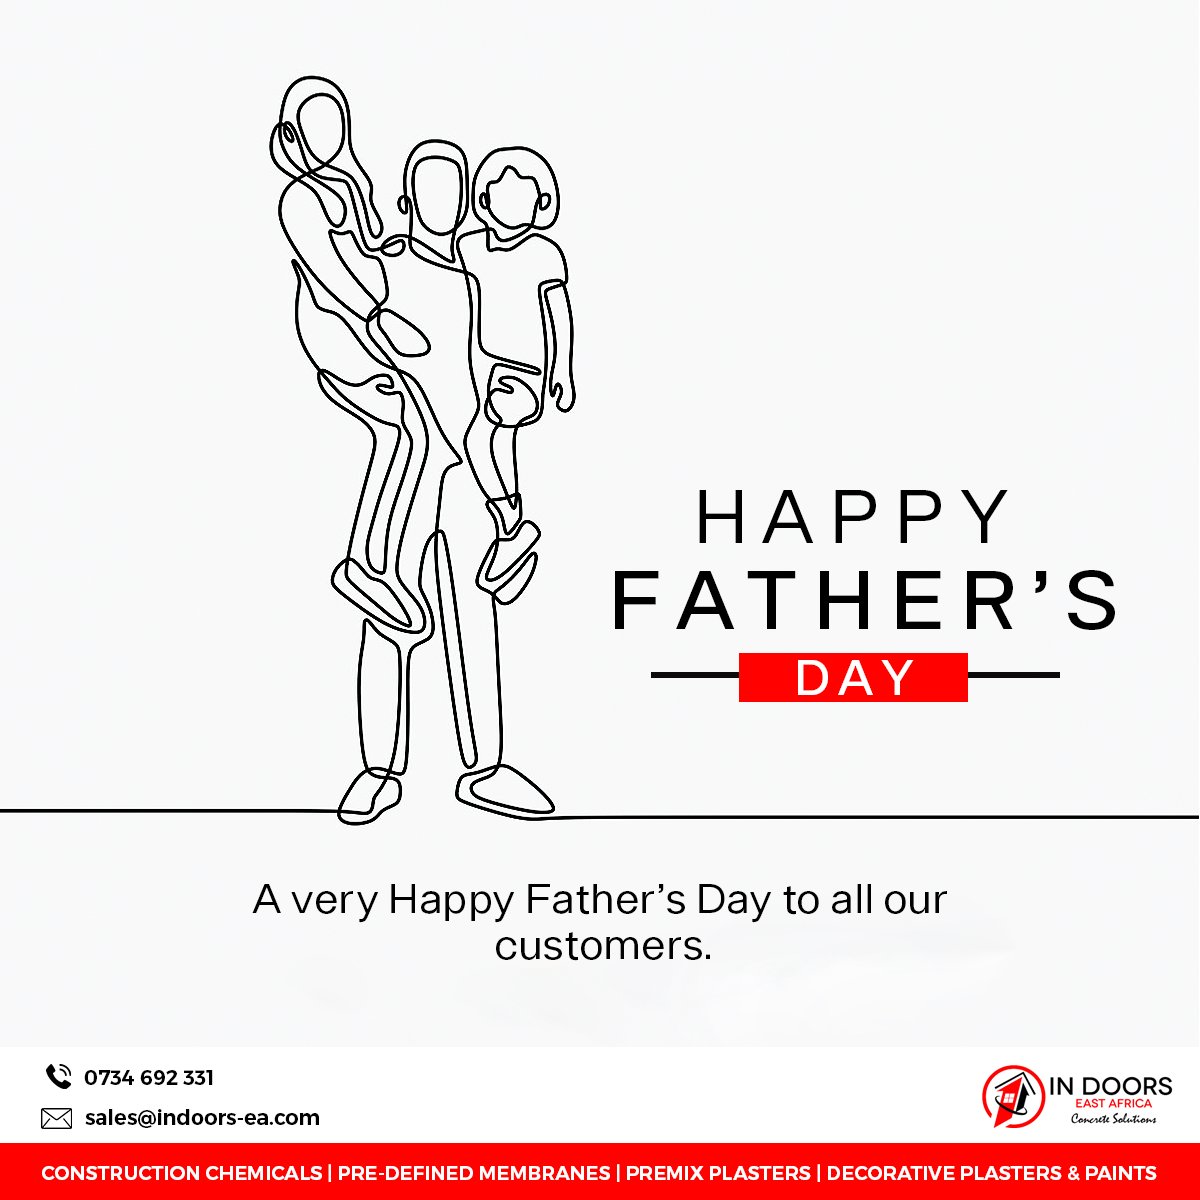 Building bonds that last a lifetime. Happy Father's Day from your trusted construction chemicals supplier

#HappyFathersDay #ConstructionChemicals #ConstructionSupplies #ConstructionIndustry #BuildingSuccess #FathersDayCelebration